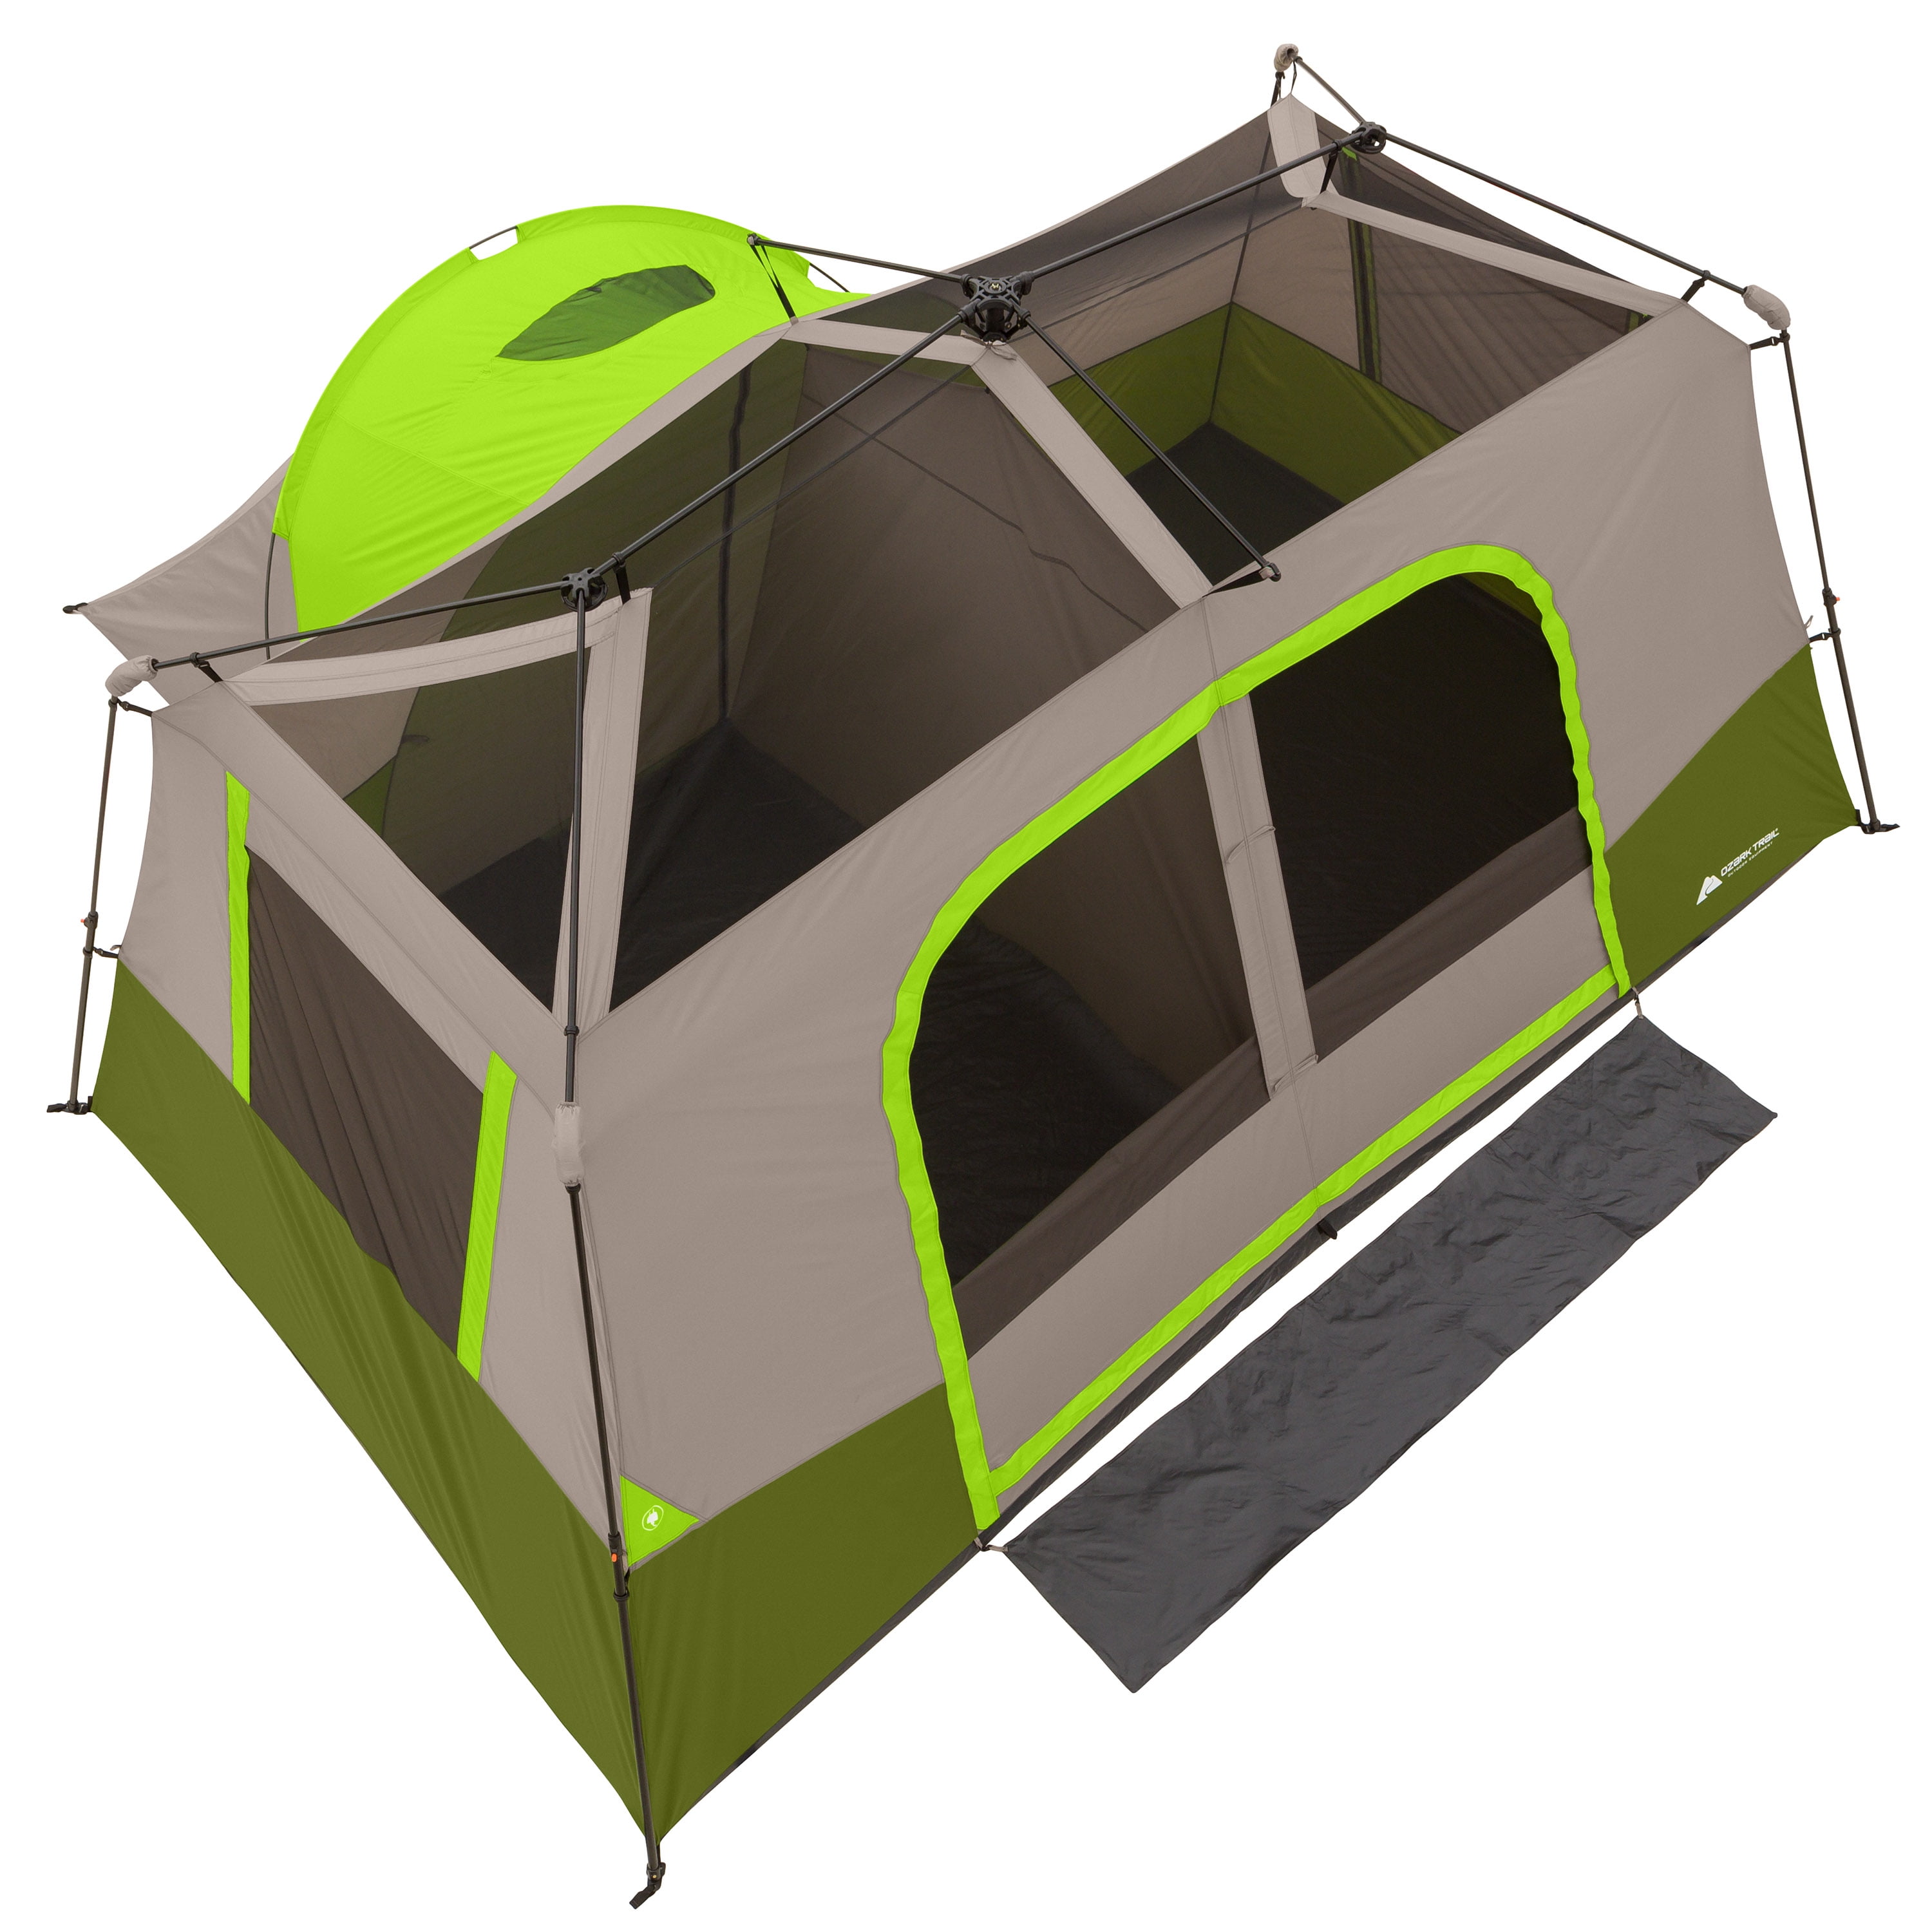 Camping Tent 11 Person 3 Room Instant Cabin Tent Outdoor Sleeping Unit Green NEW 